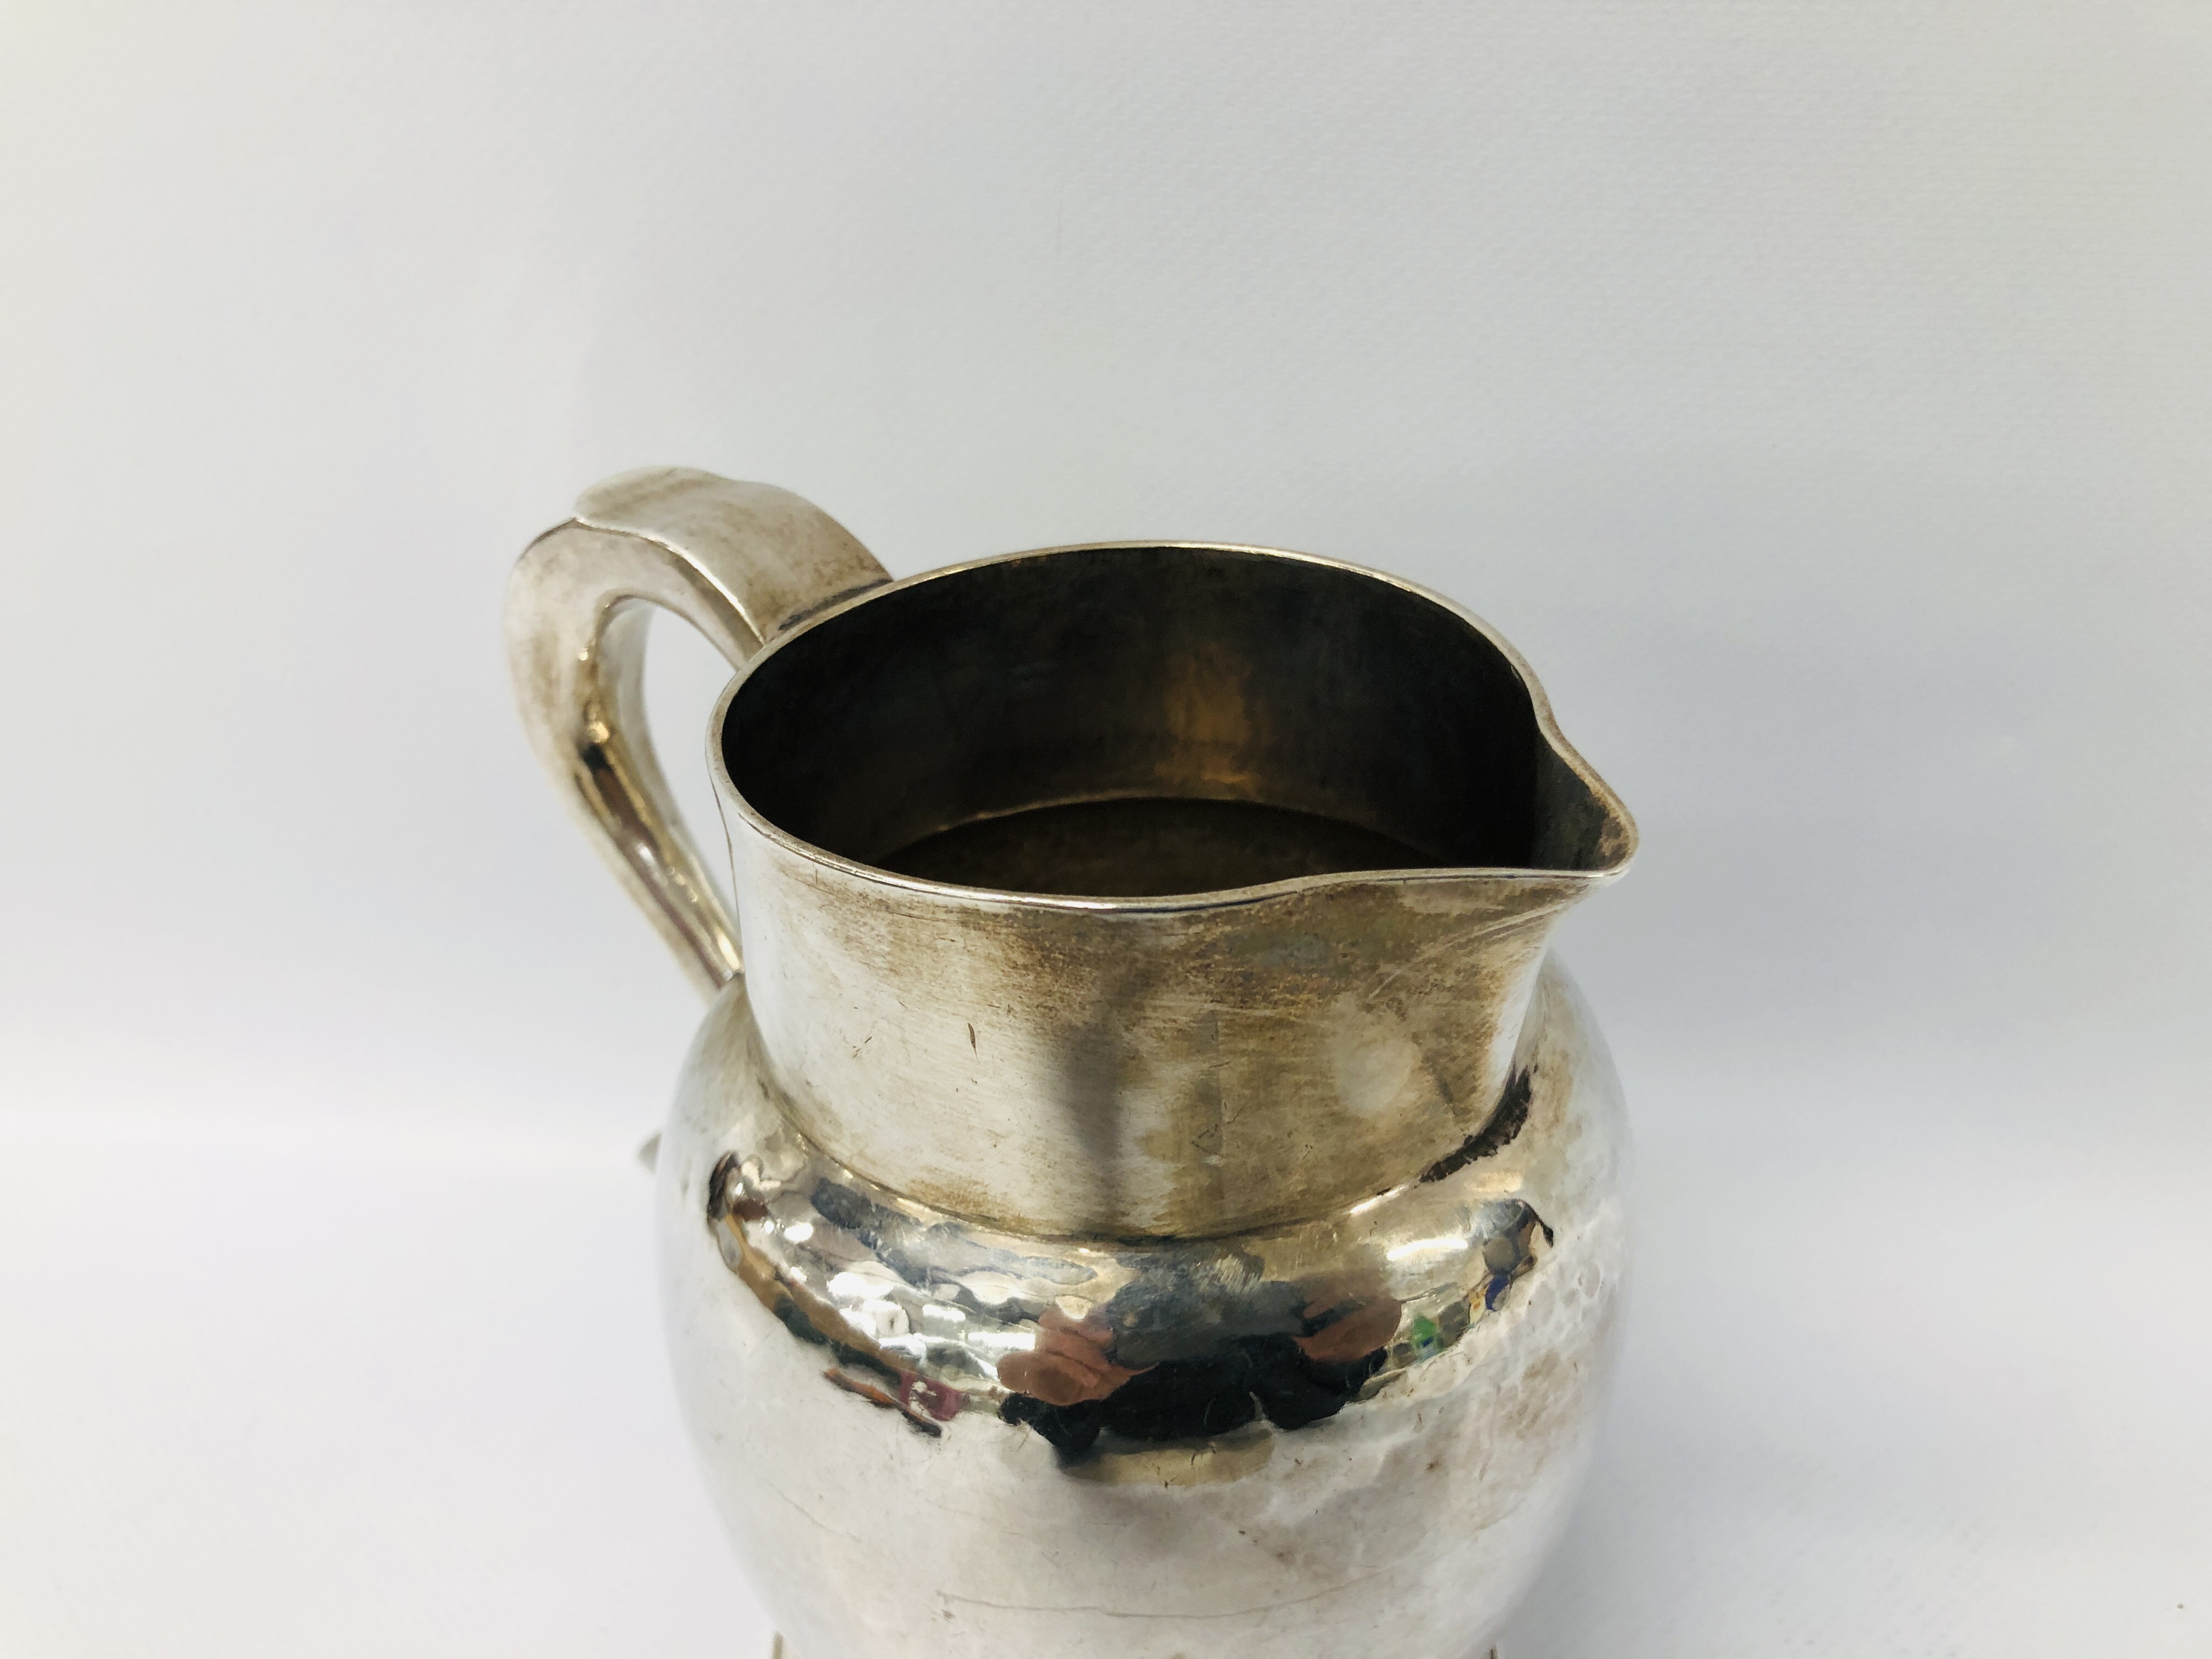 A GEORGE III SILVER JUG, THE 'S' SHAPED HANDLE ON A PLAIN BULBOUS BODY, NEWCASTLE 1790, J. - Image 12 of 21